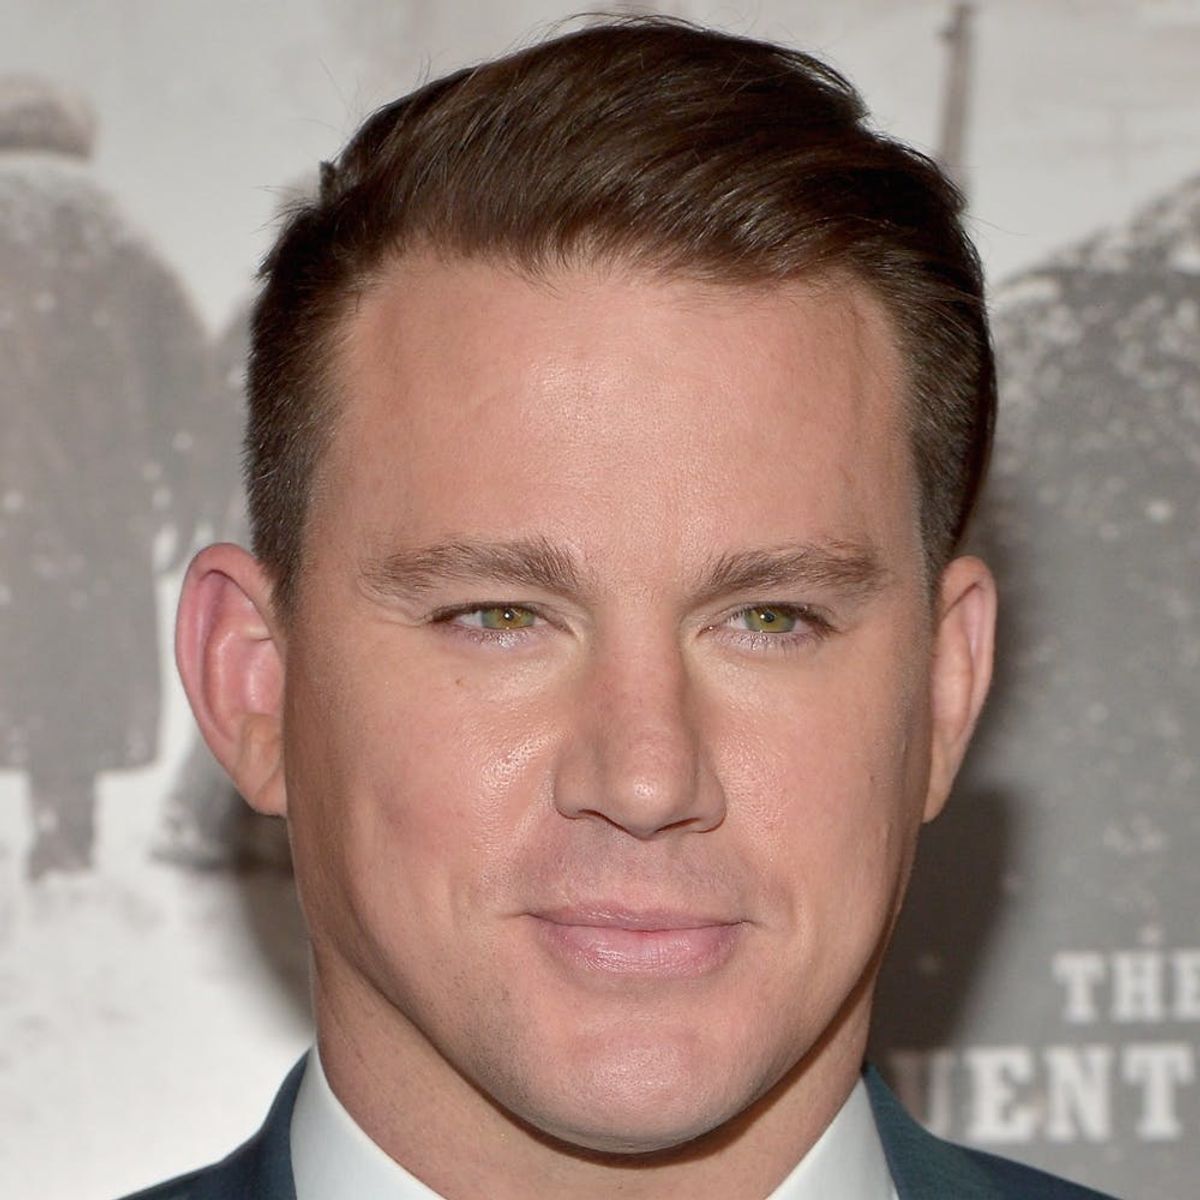 Channing Tatum in Full Beyoncé Drag Is the Best Thing You’ll Ever See